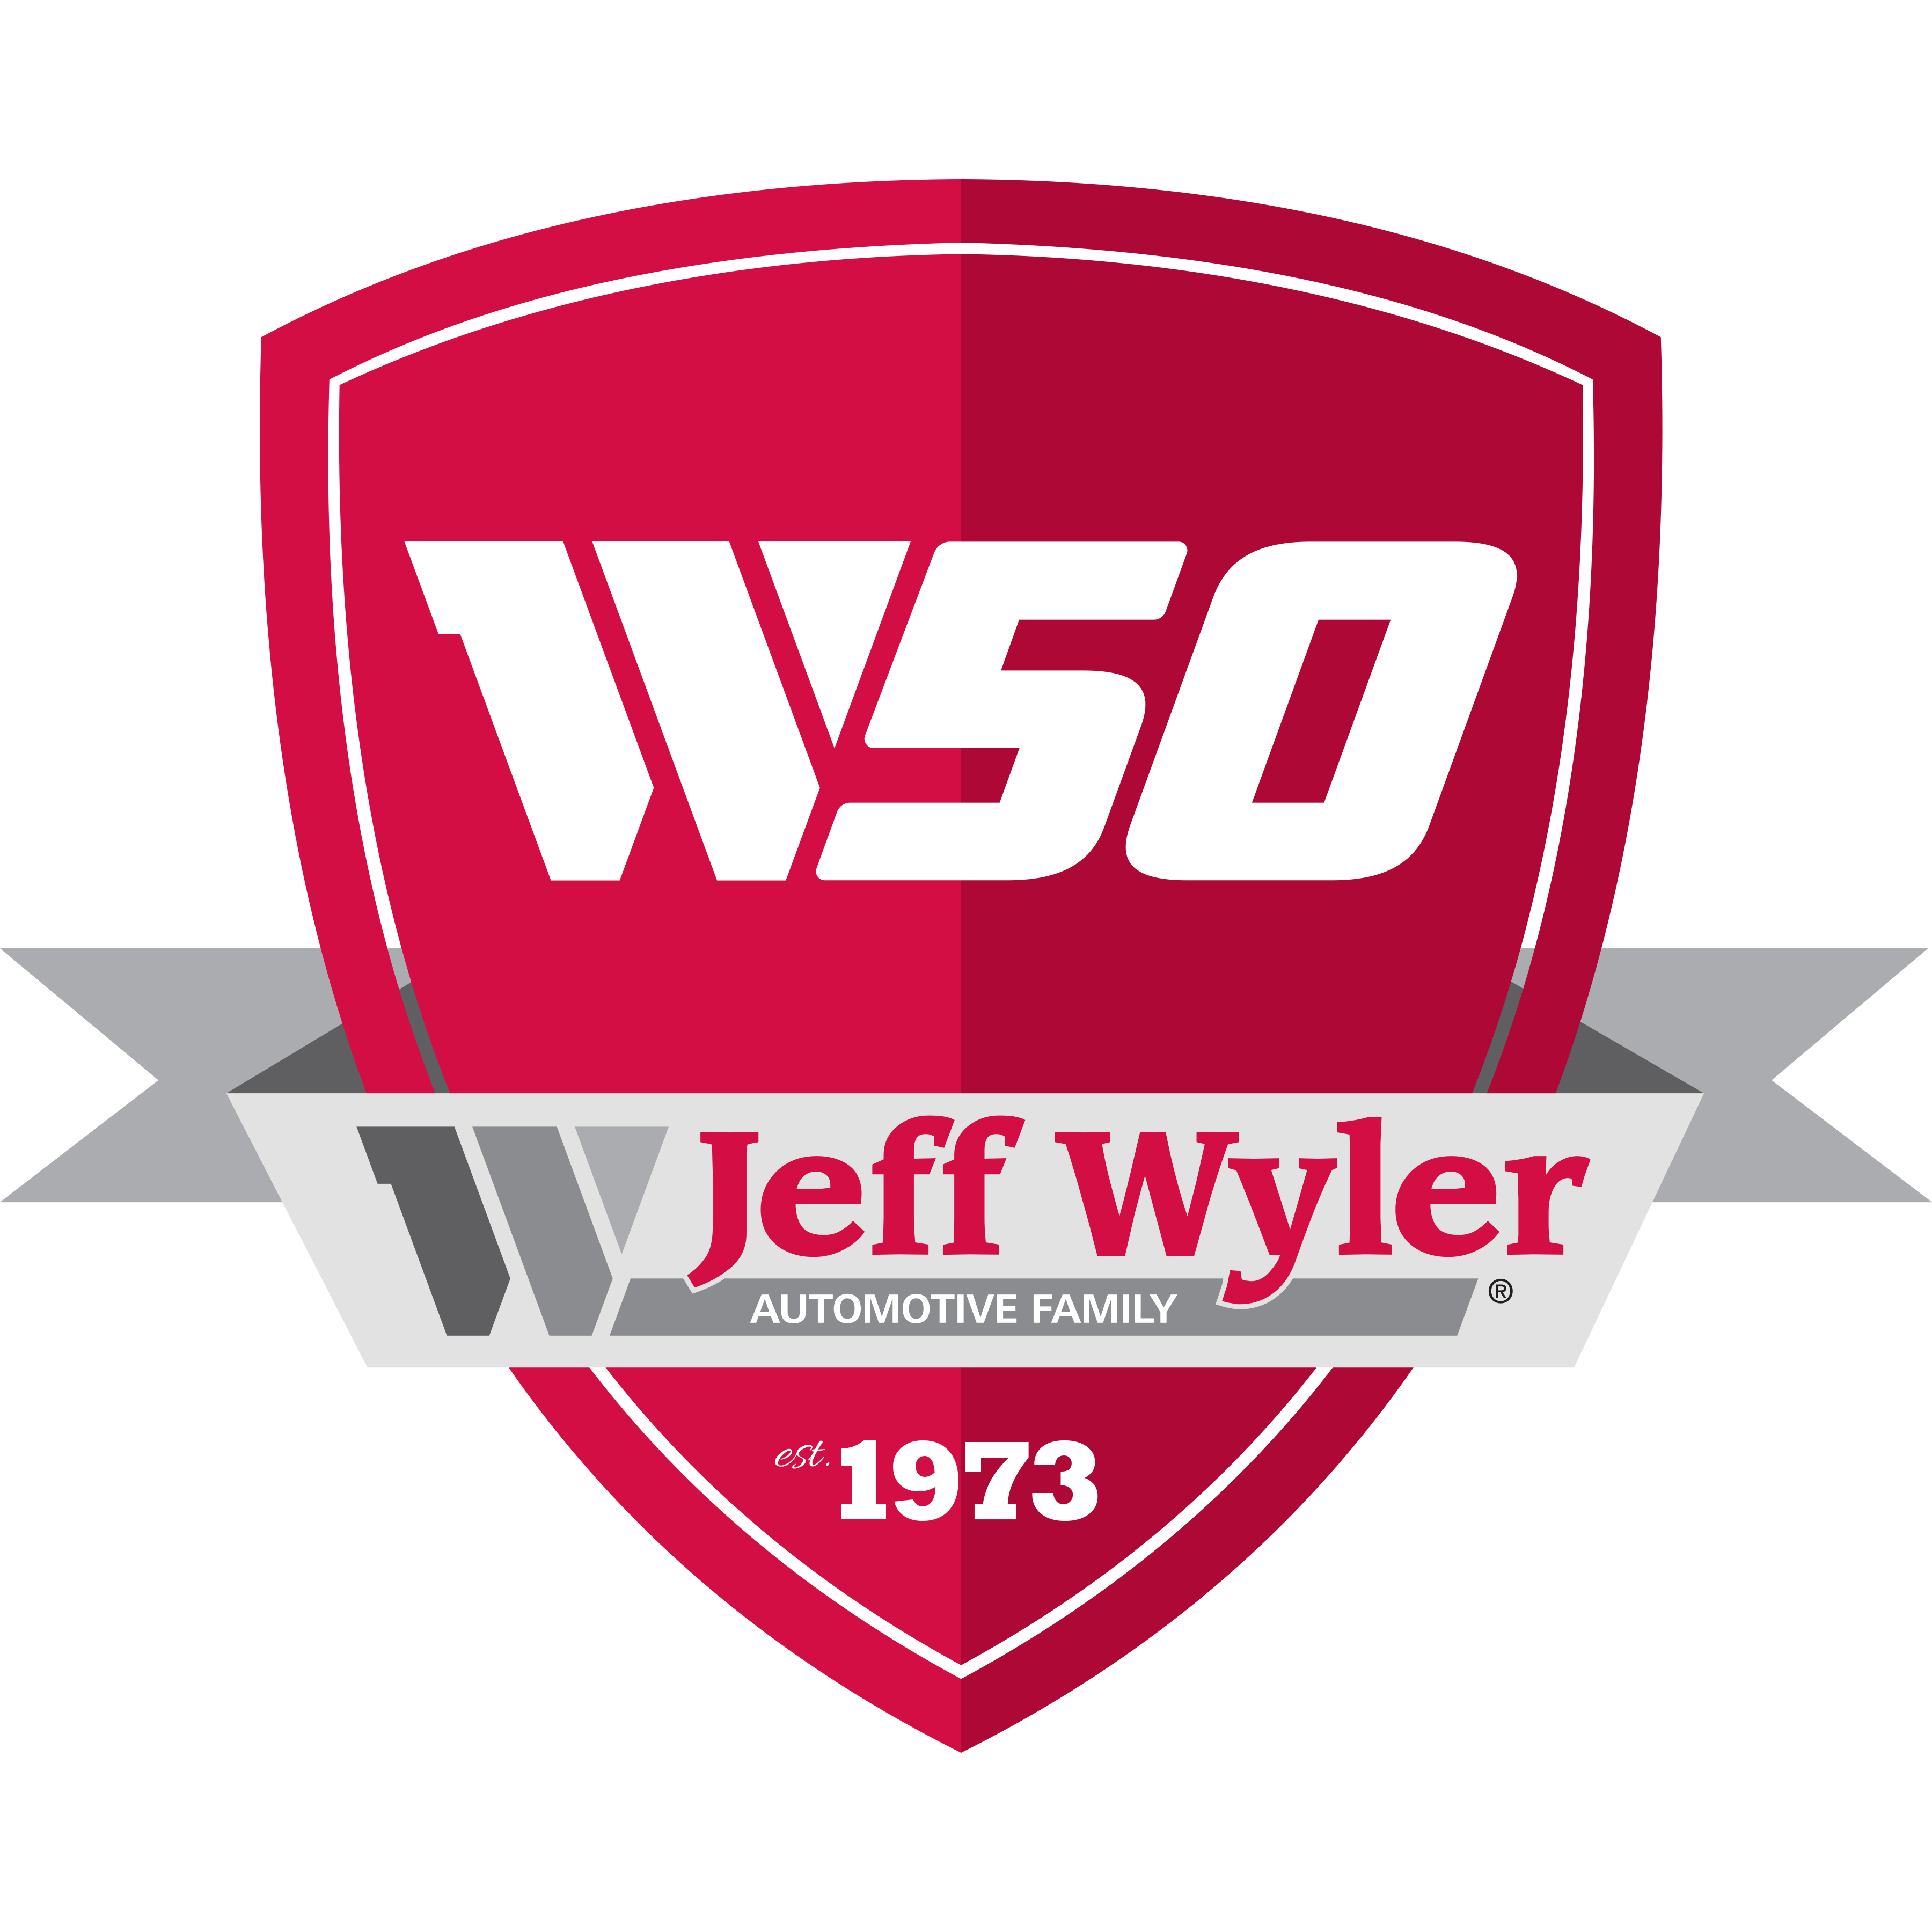 Jeff Wyler Columbus Auto Mall - Canal Winchester, OH 43110 - (614)837-3421 | ShowMeLocal.com